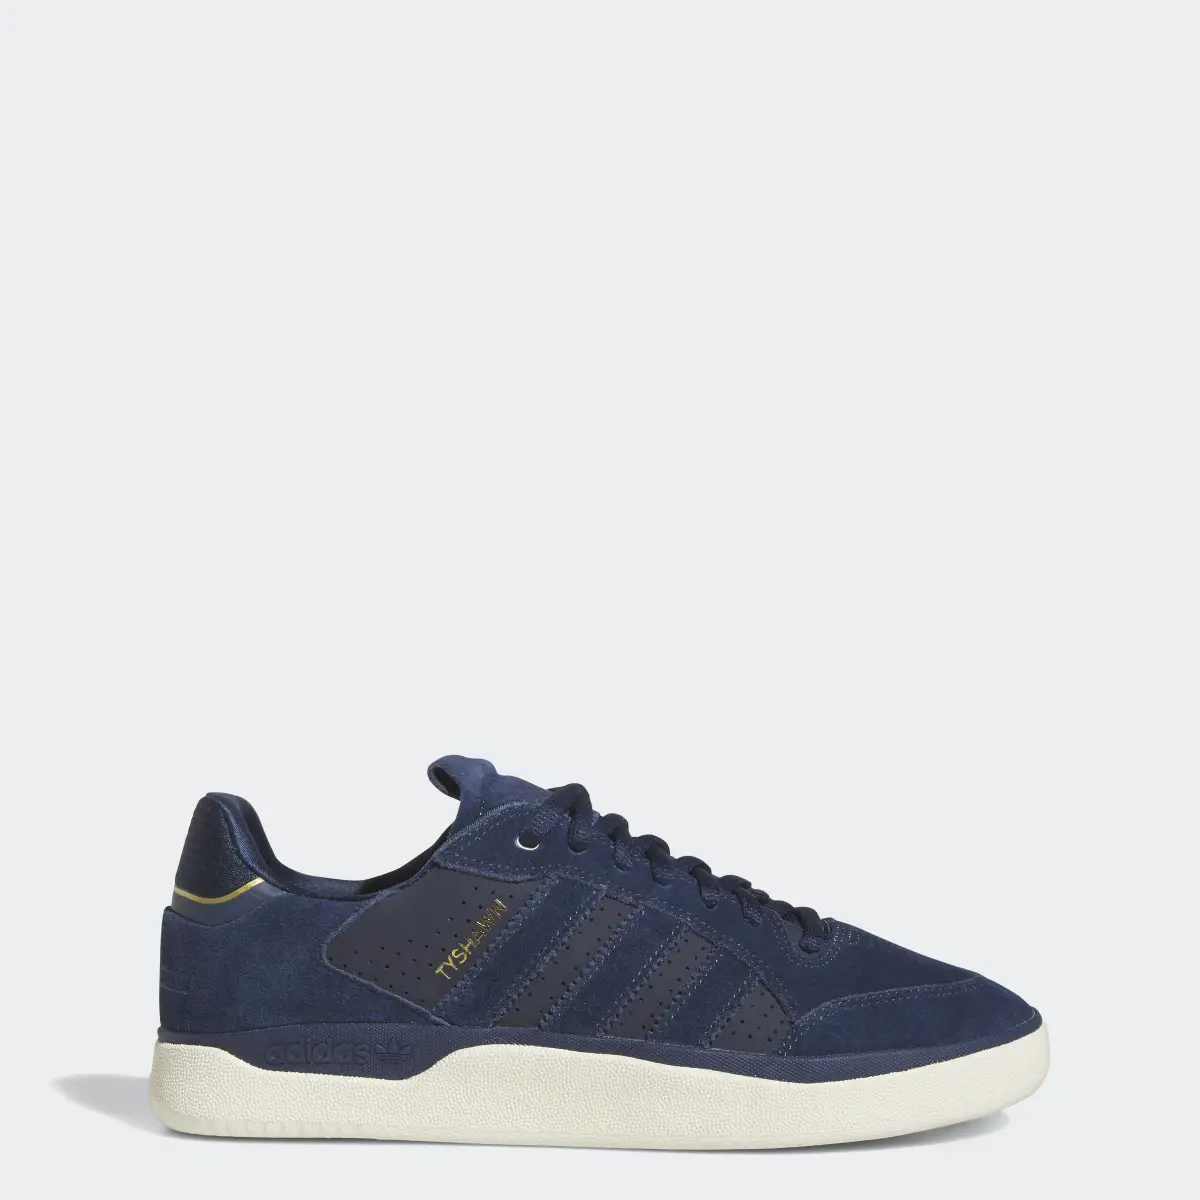 Adidas Tyshawn Low Shoes. 1